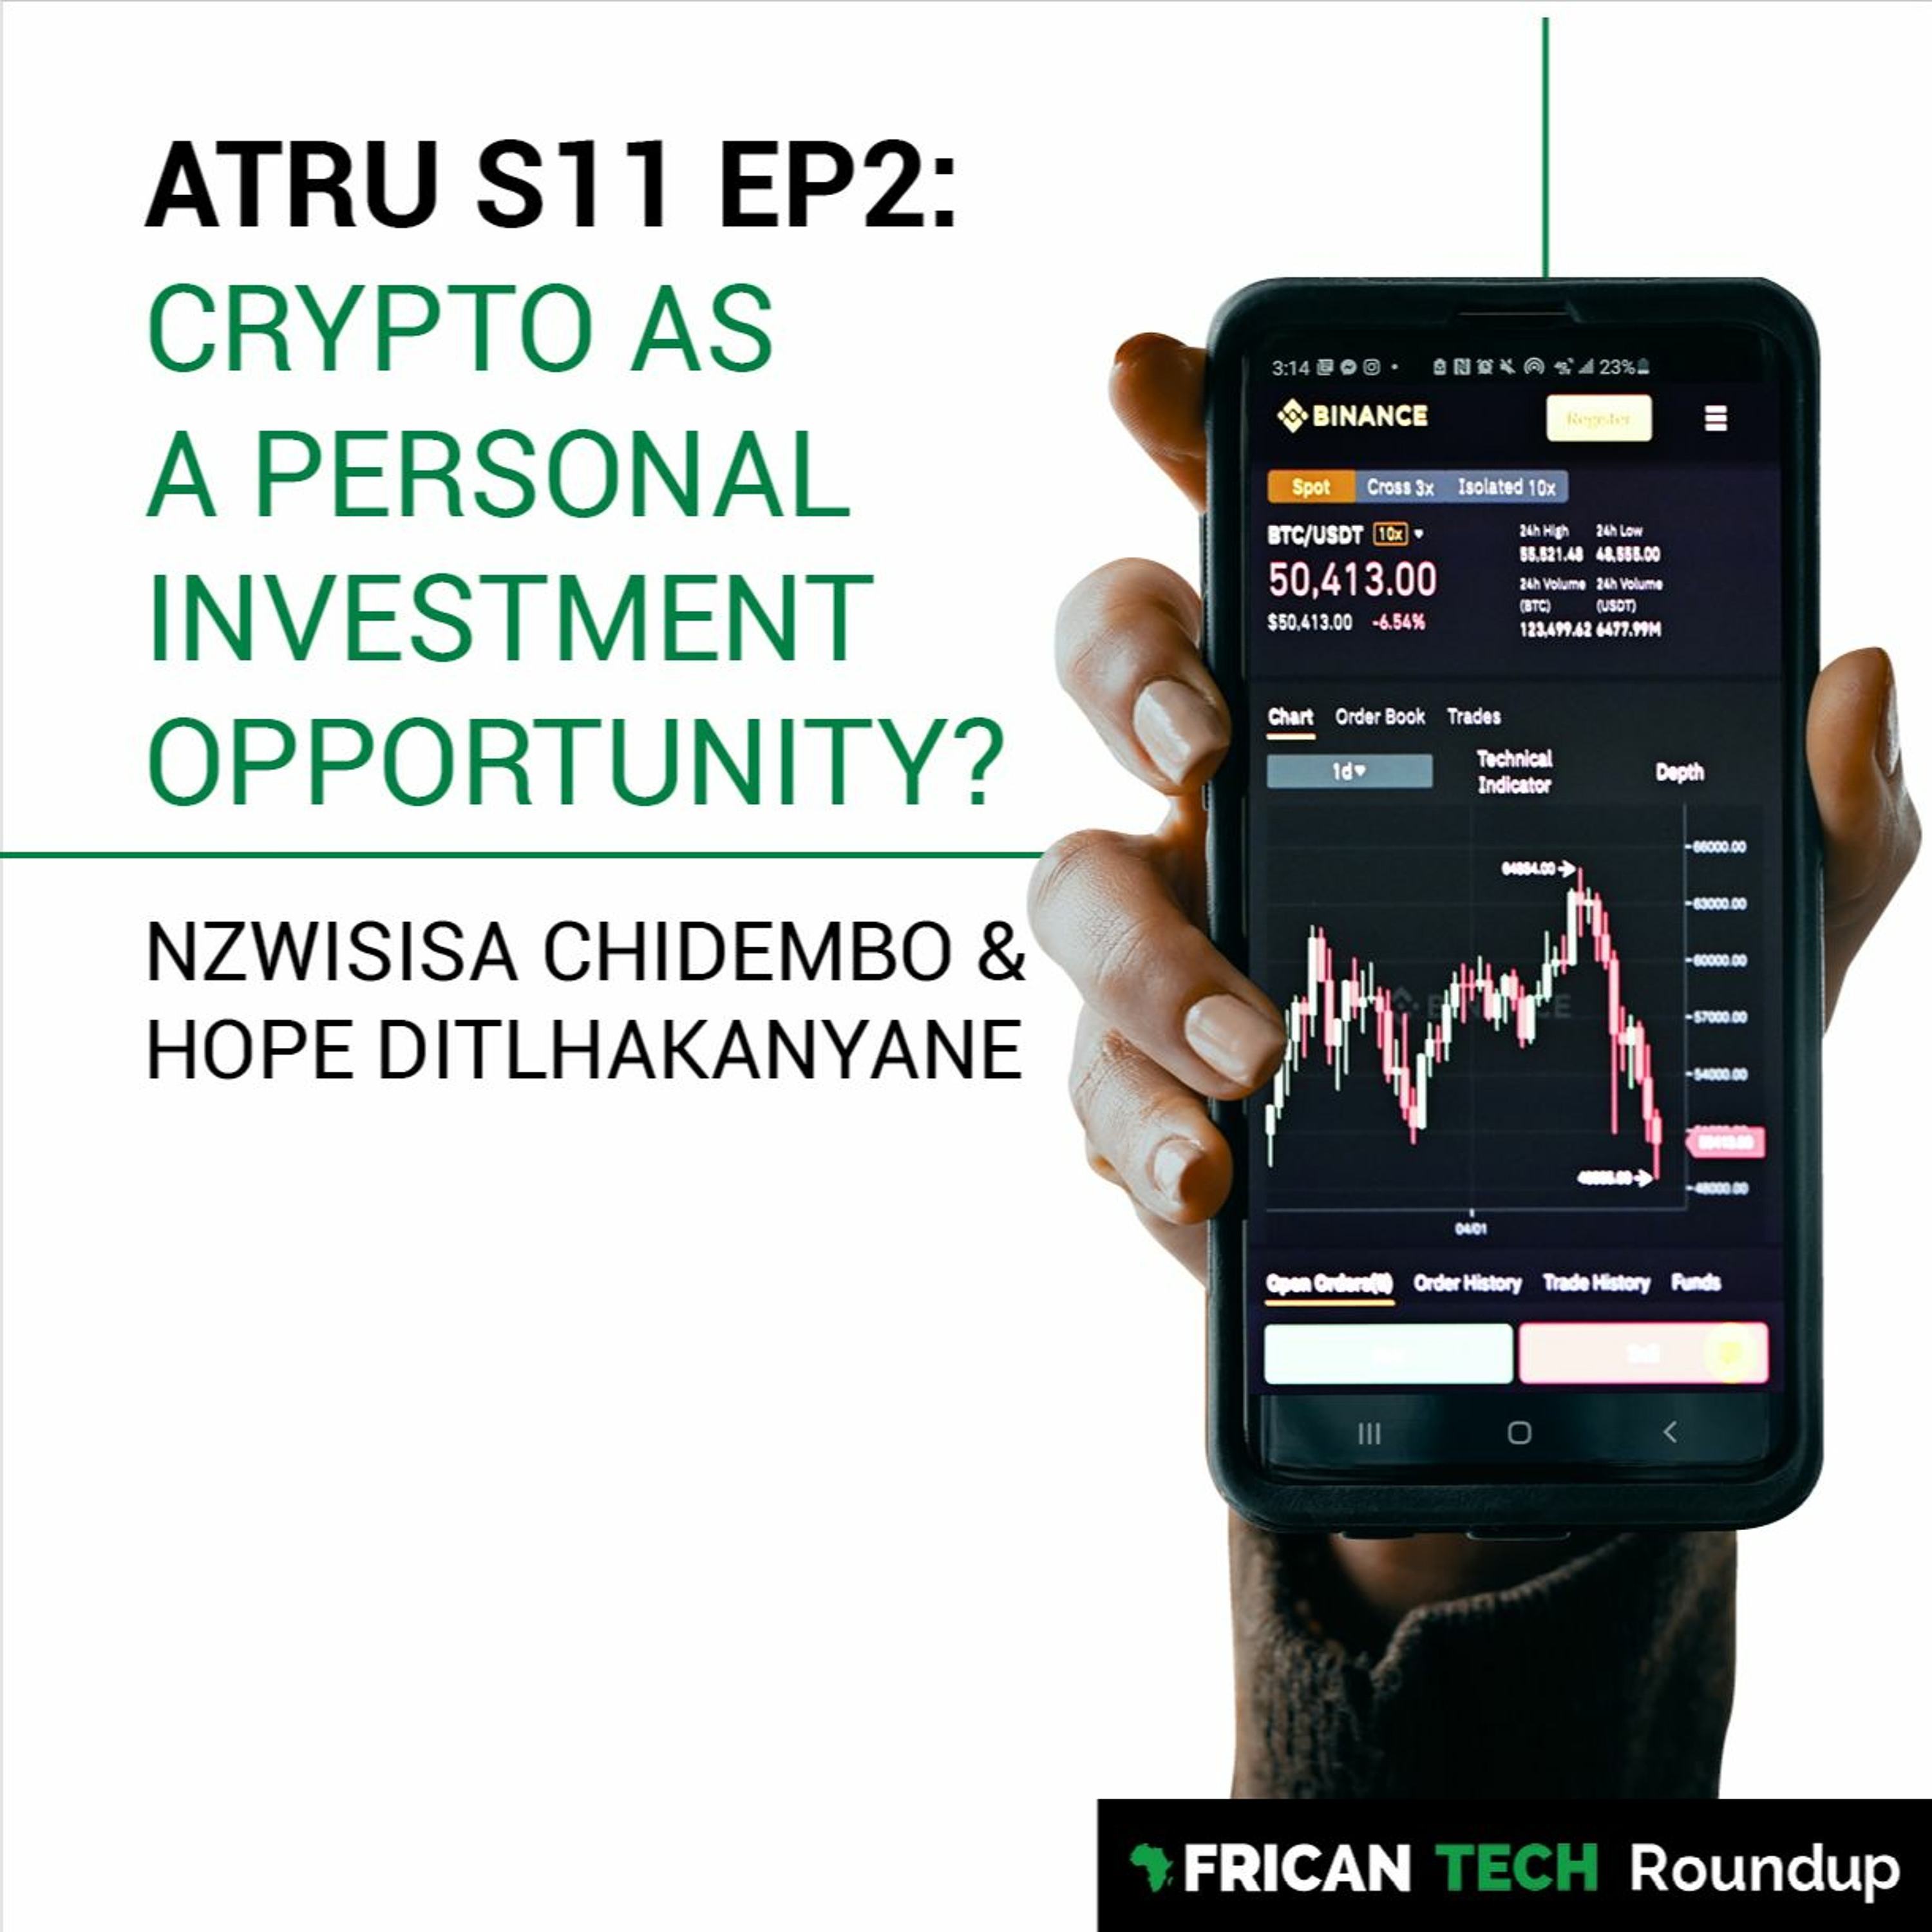 UNAJUA S11 EP2: Crypto as a personal investment opportunity? ft. Hope Ditlhakanyane & Nzwi Chidembo